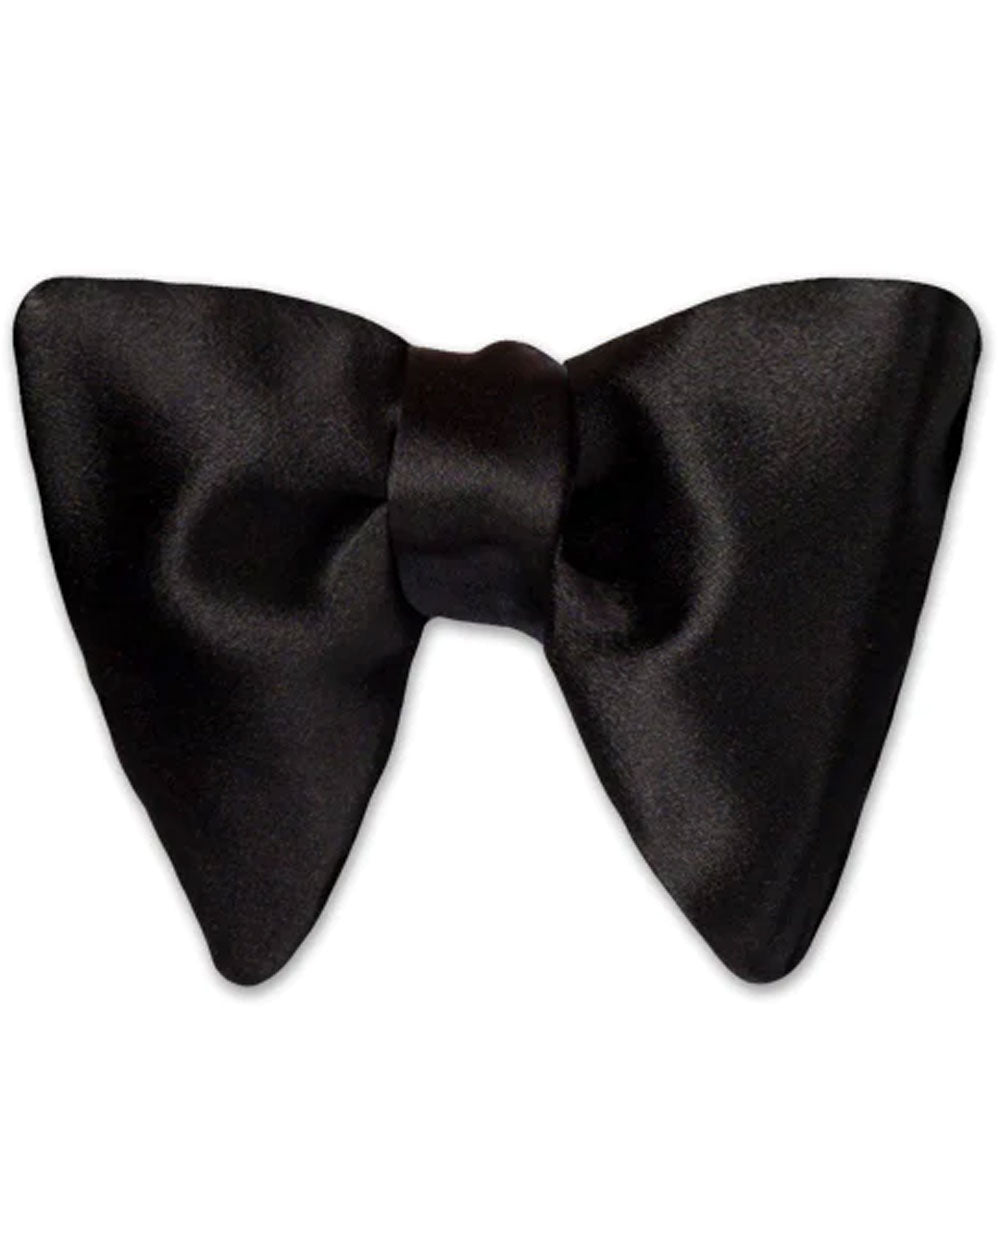 Black Butterfly Satin Bow Tie